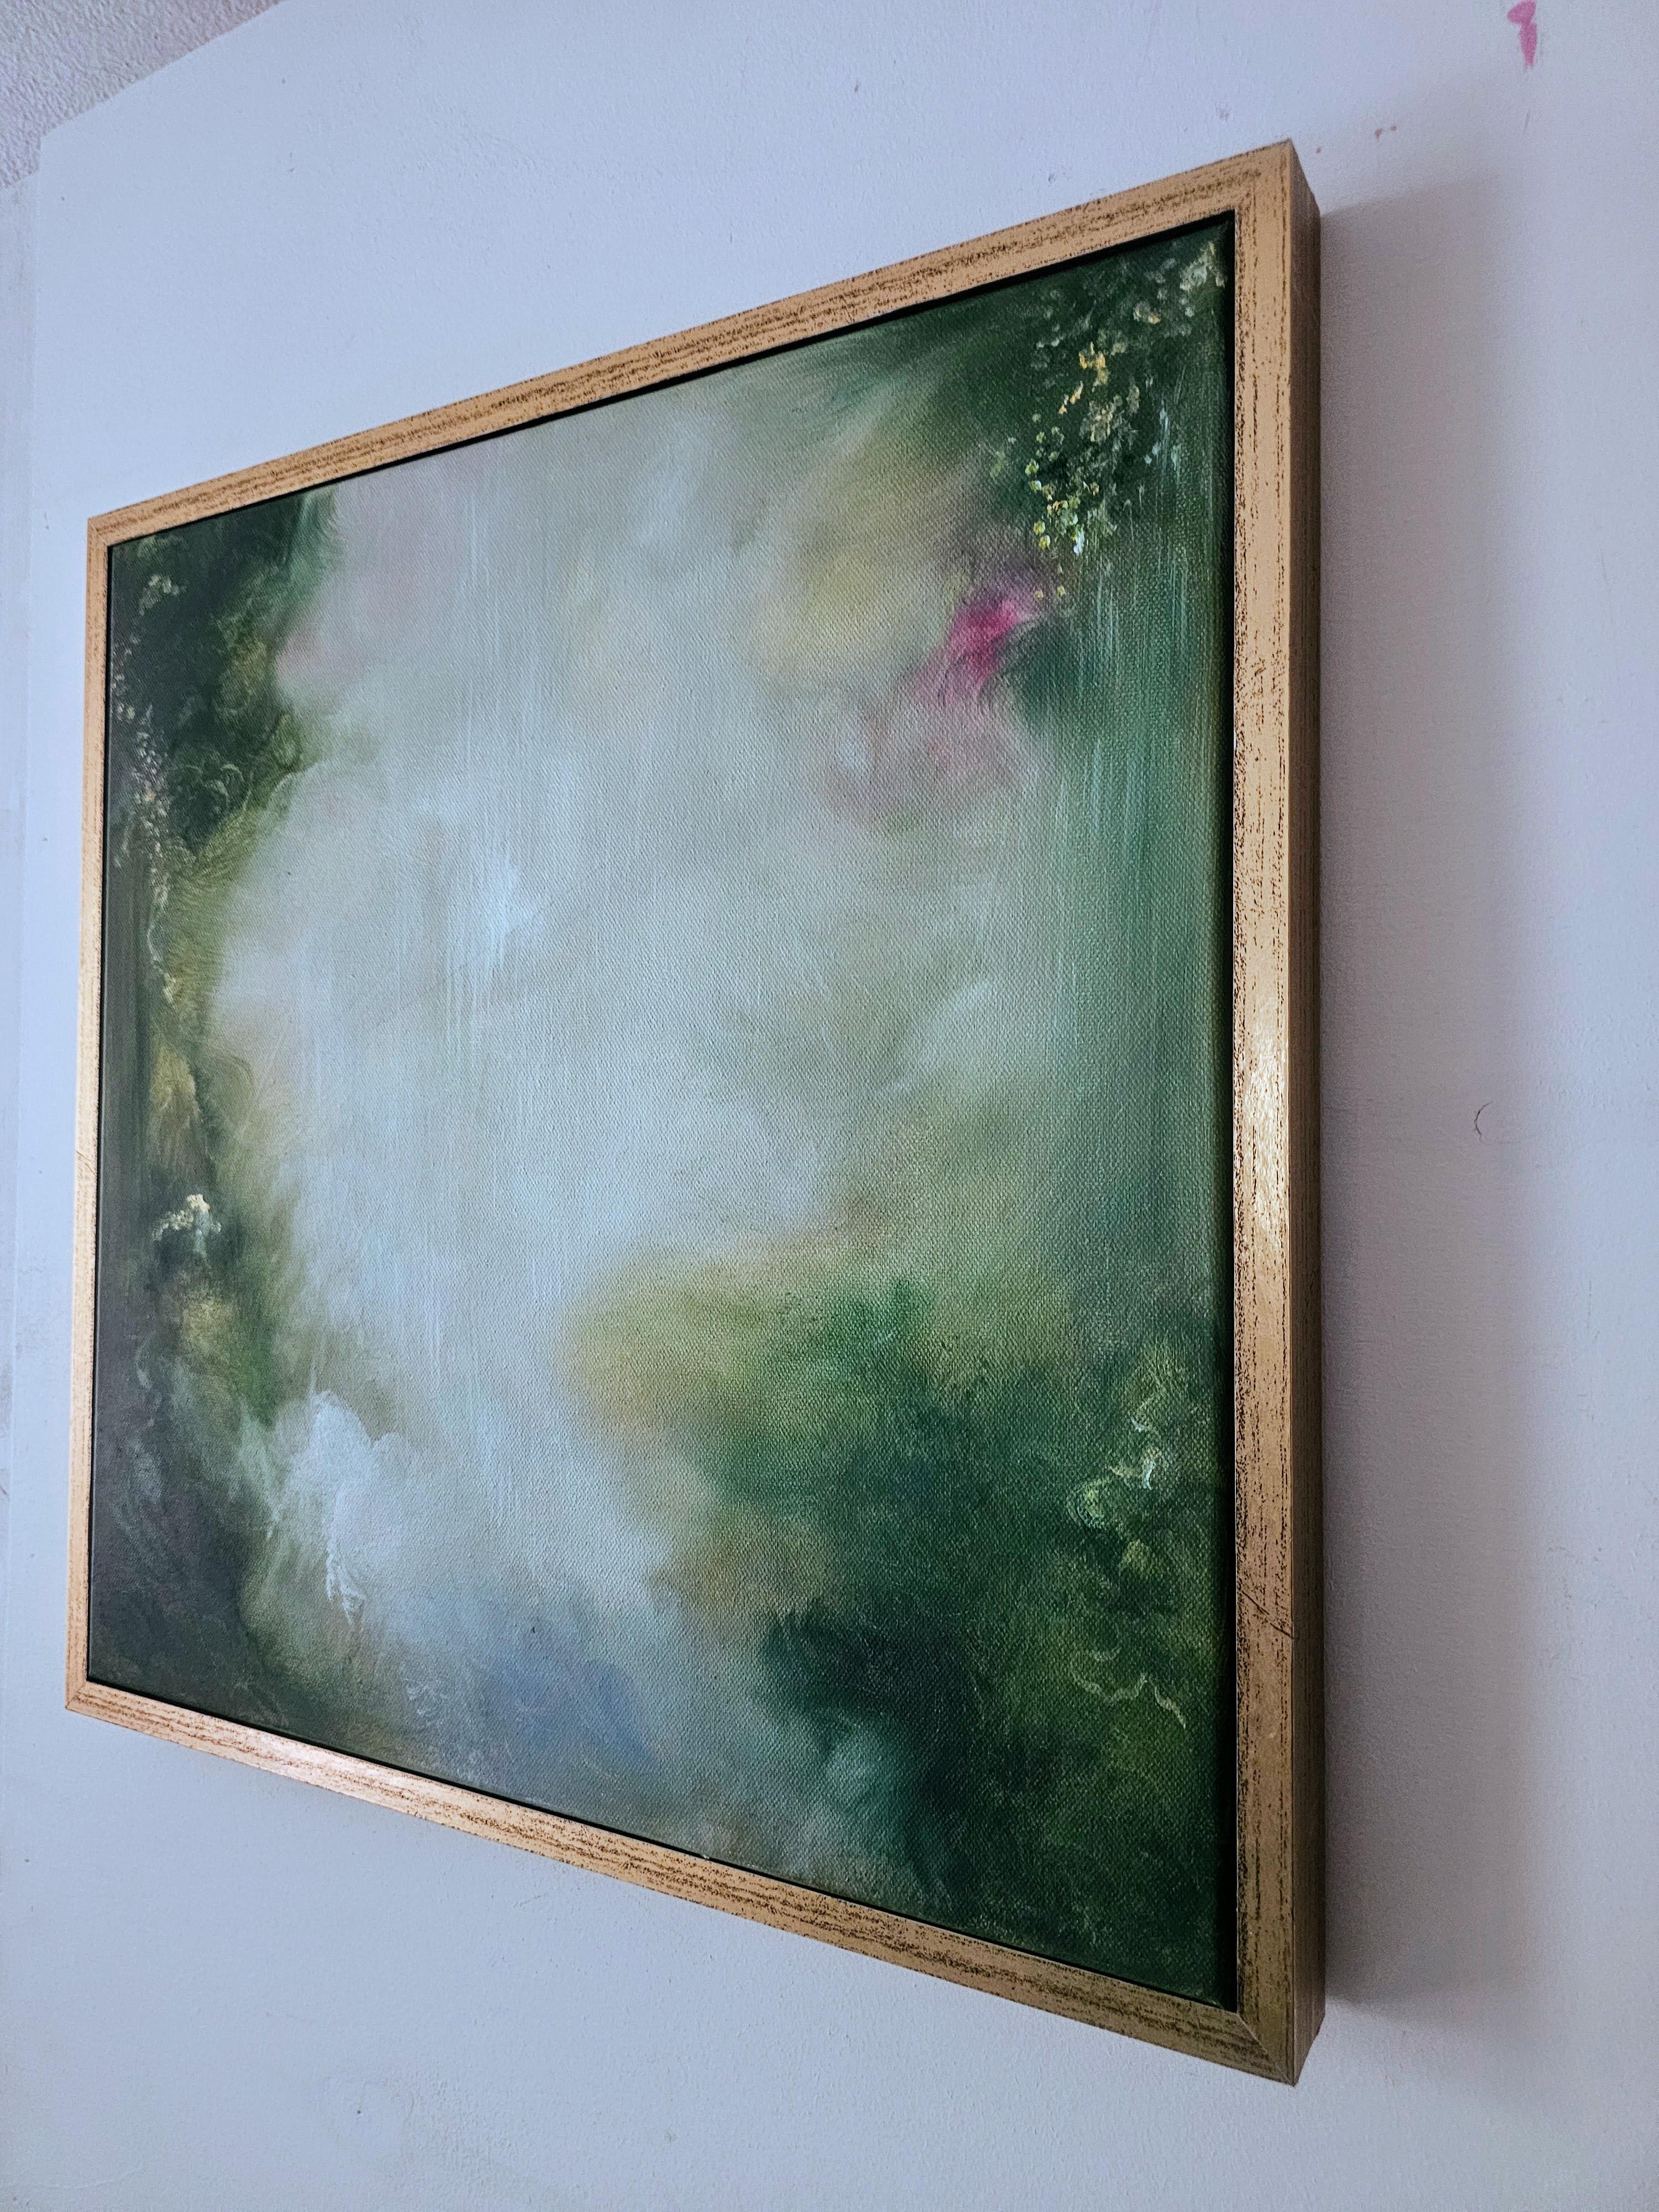 Enchanted - Framed abstract green nature painting - Gray Abstract Painting by Jennifer L. Baker